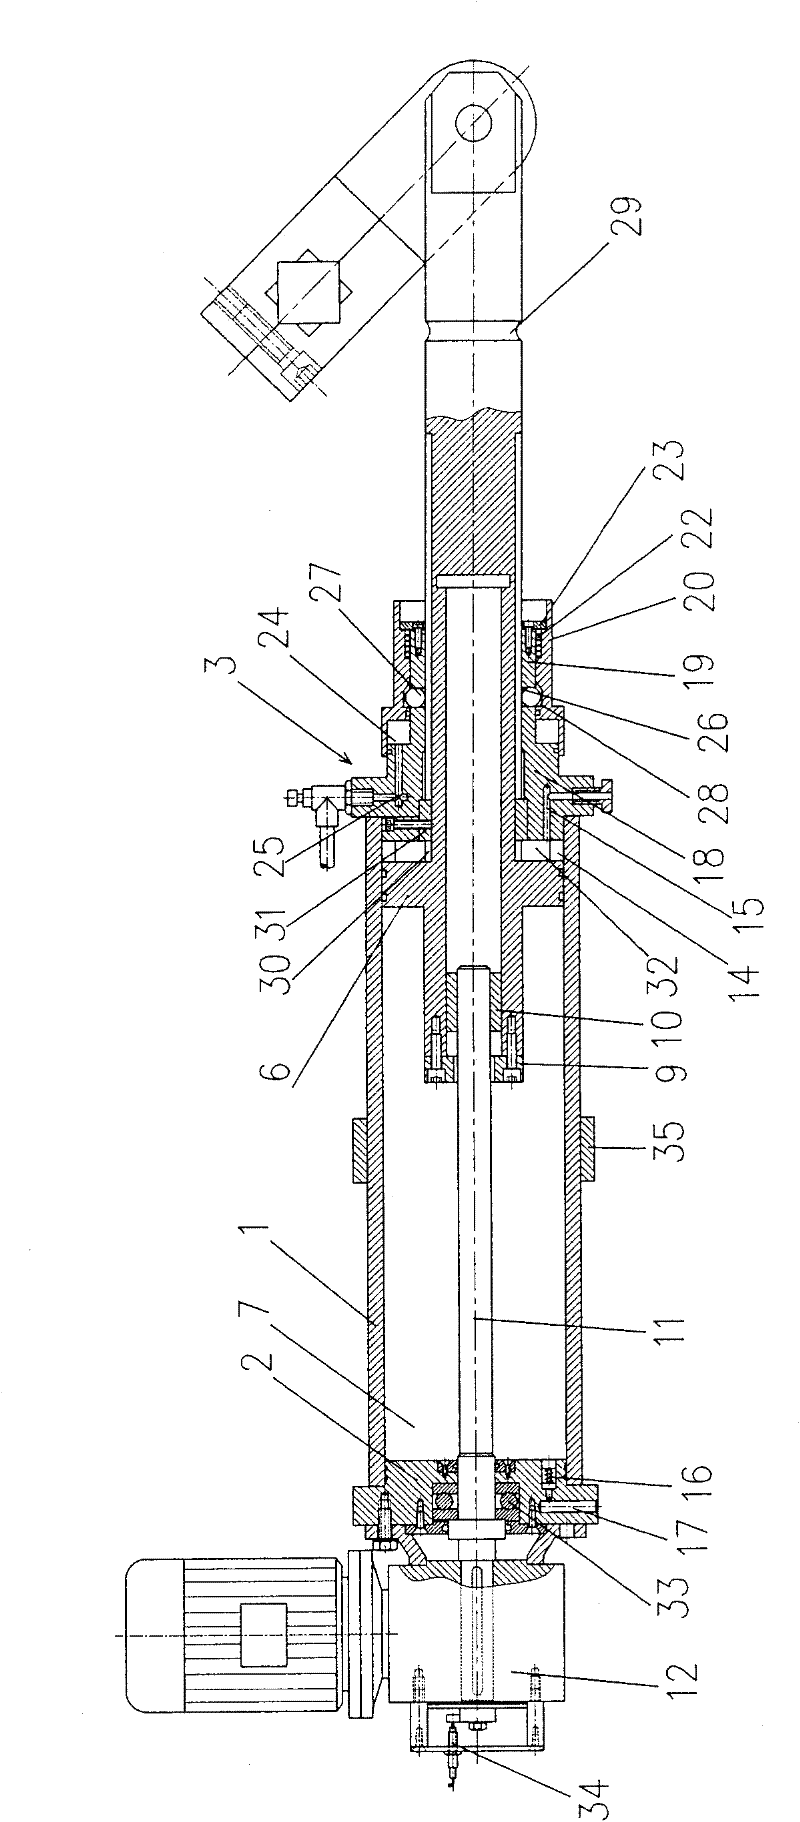 Air pressure ejection instant starting device